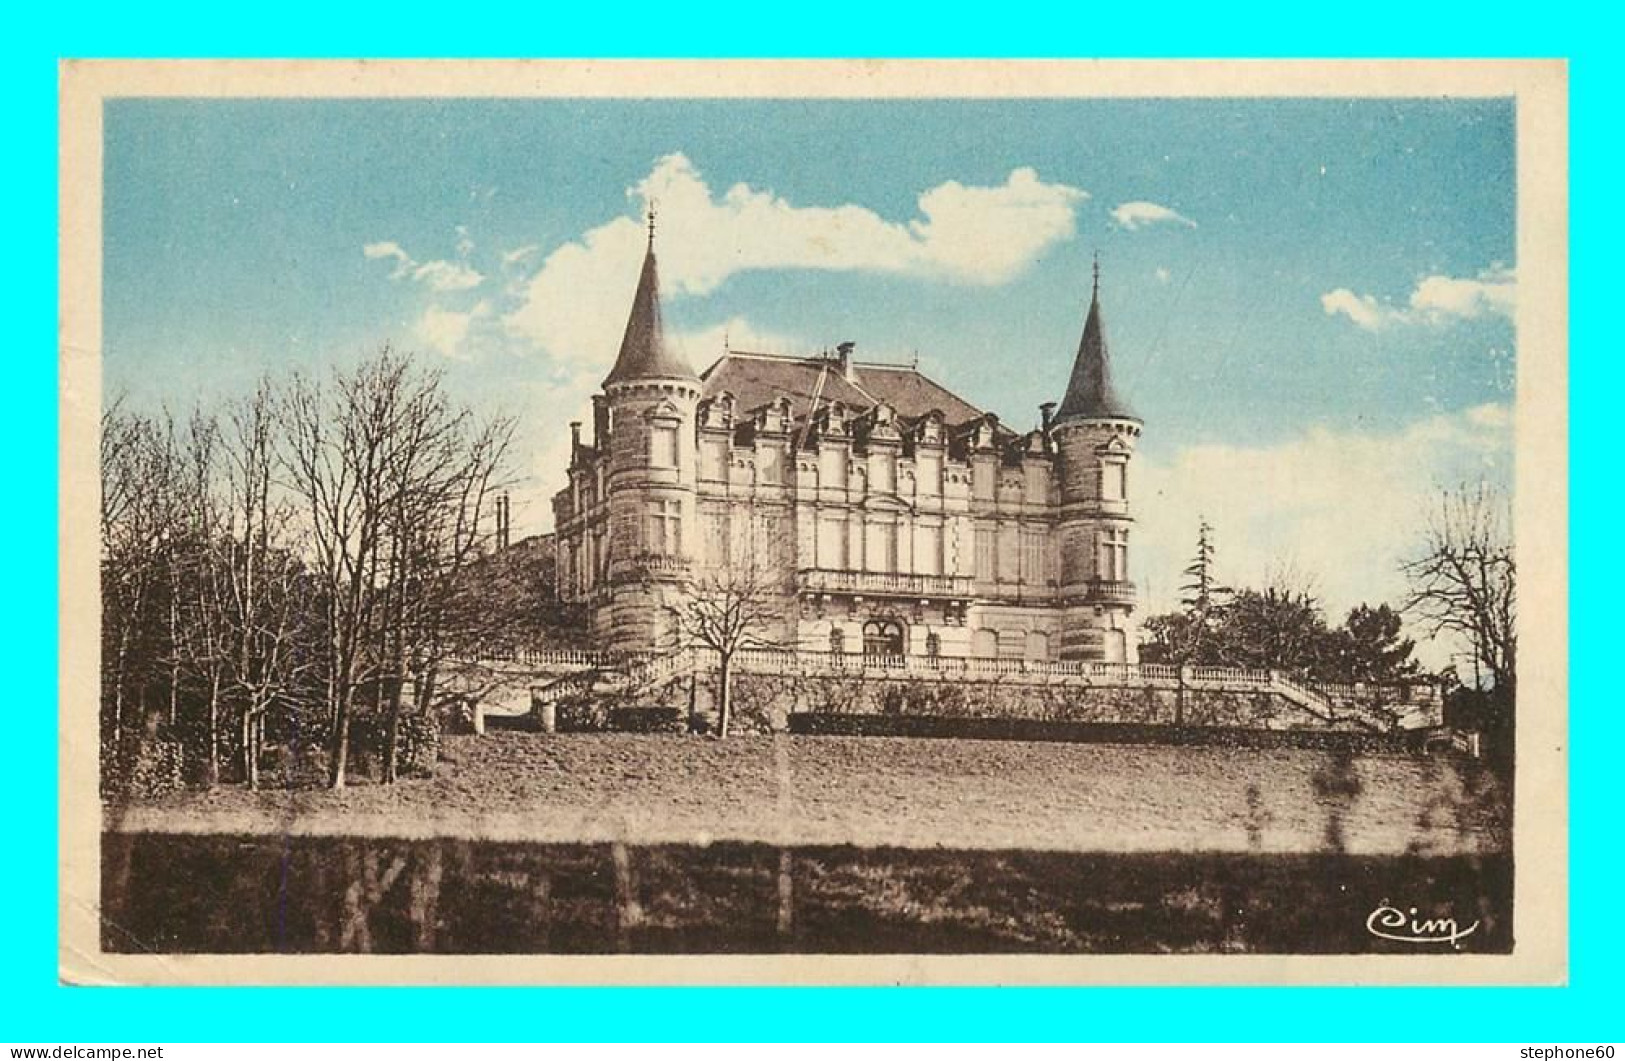 1lo - a282   Lot de 100 CPA / CPSM format CPA HERAULT 34 principalement MONTPELLIERS